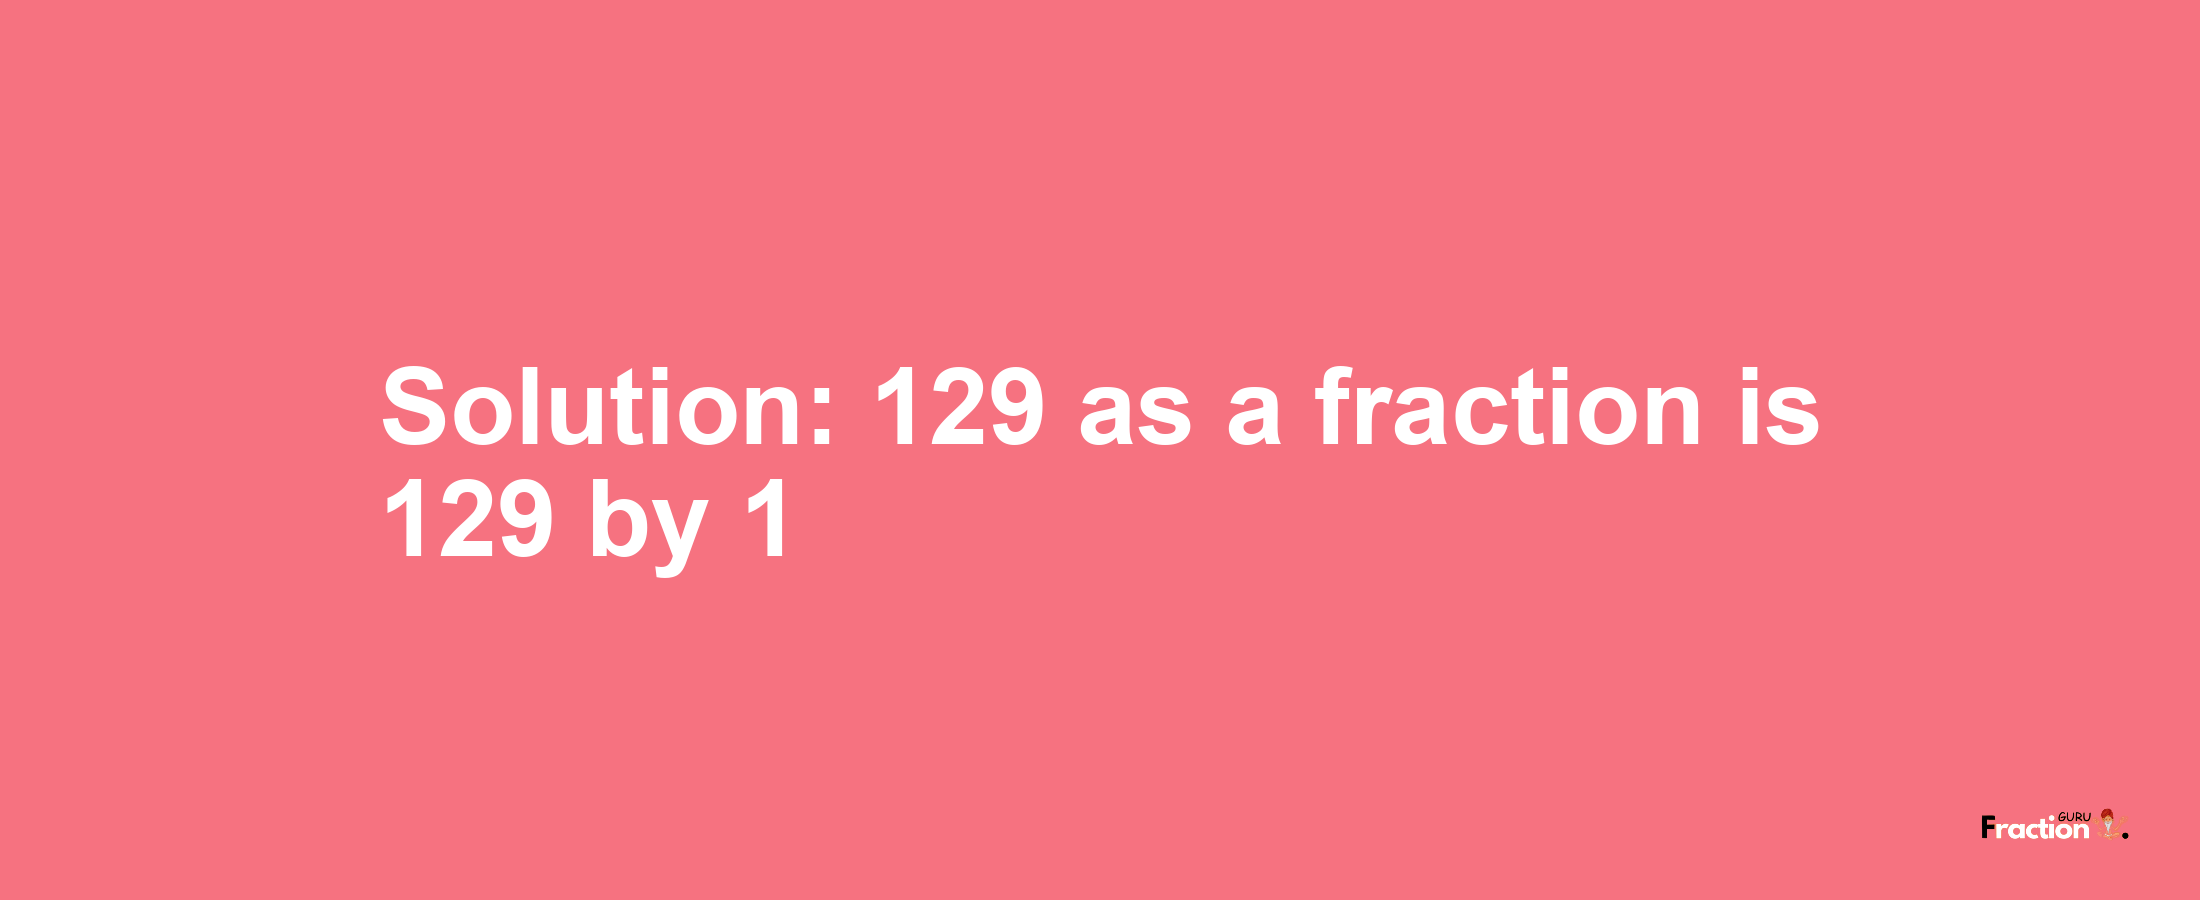 Solution:129 as a fraction is 129/1